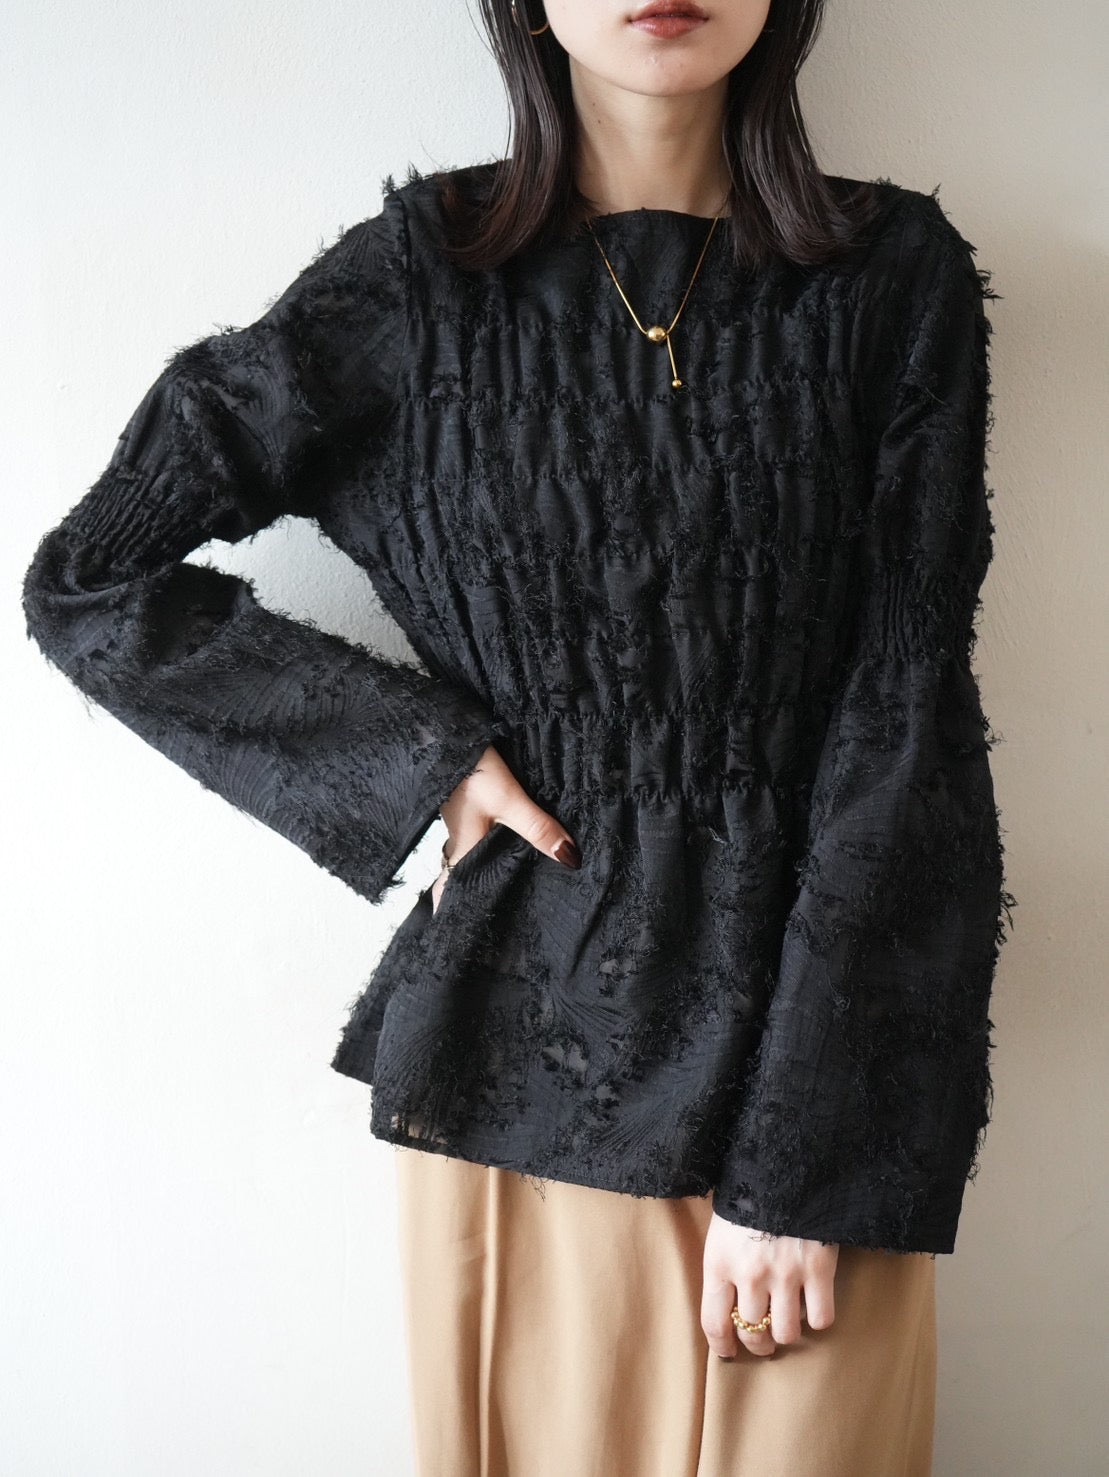 All Black Collection – ページ – Lumier